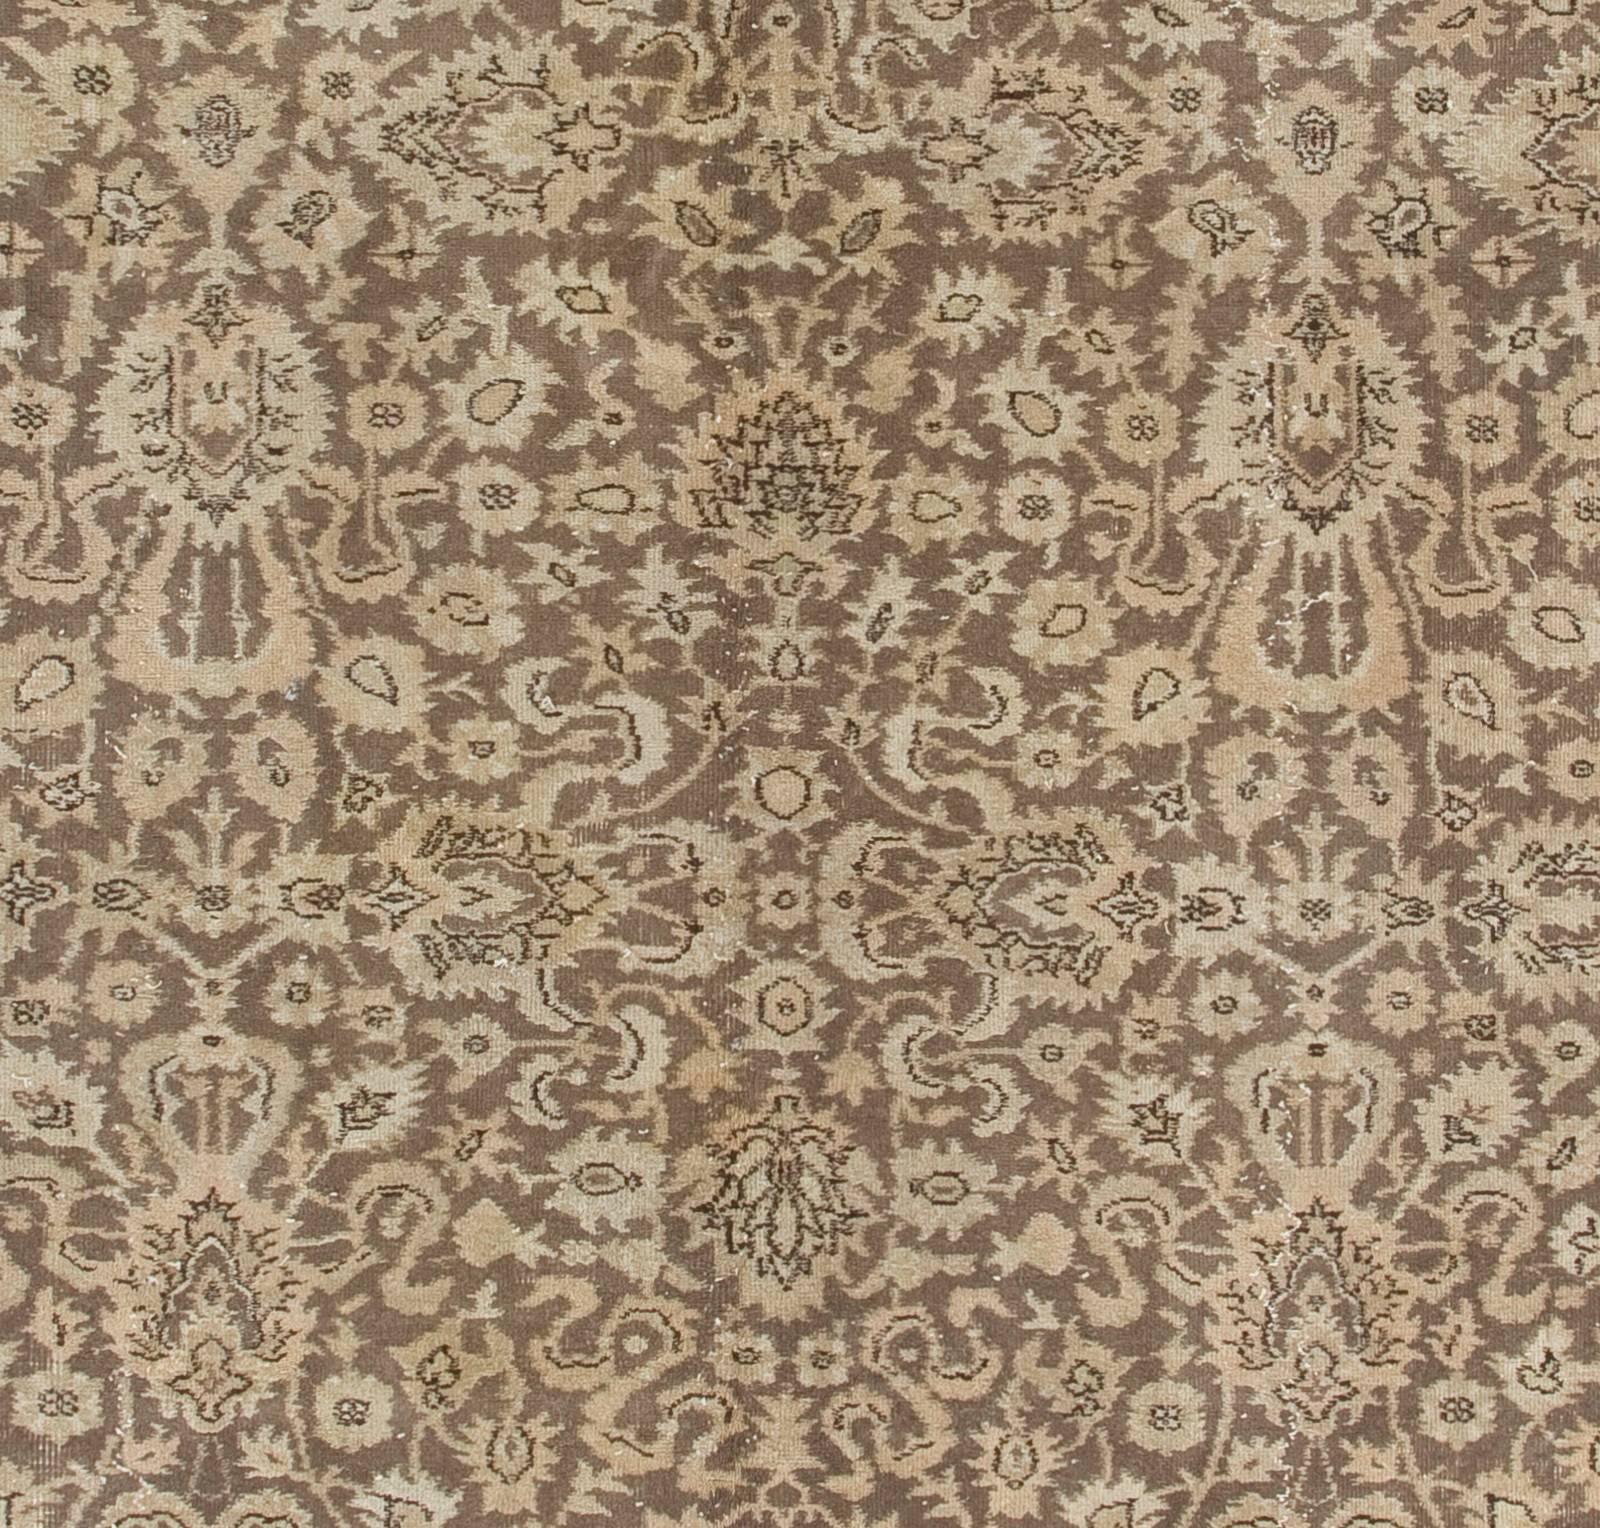 Hand-Knotted 9.2x12 Ft One-of-a-Kind Turkish Sivas Rug in Soft Taupe Brown and Beige Colors For Sale